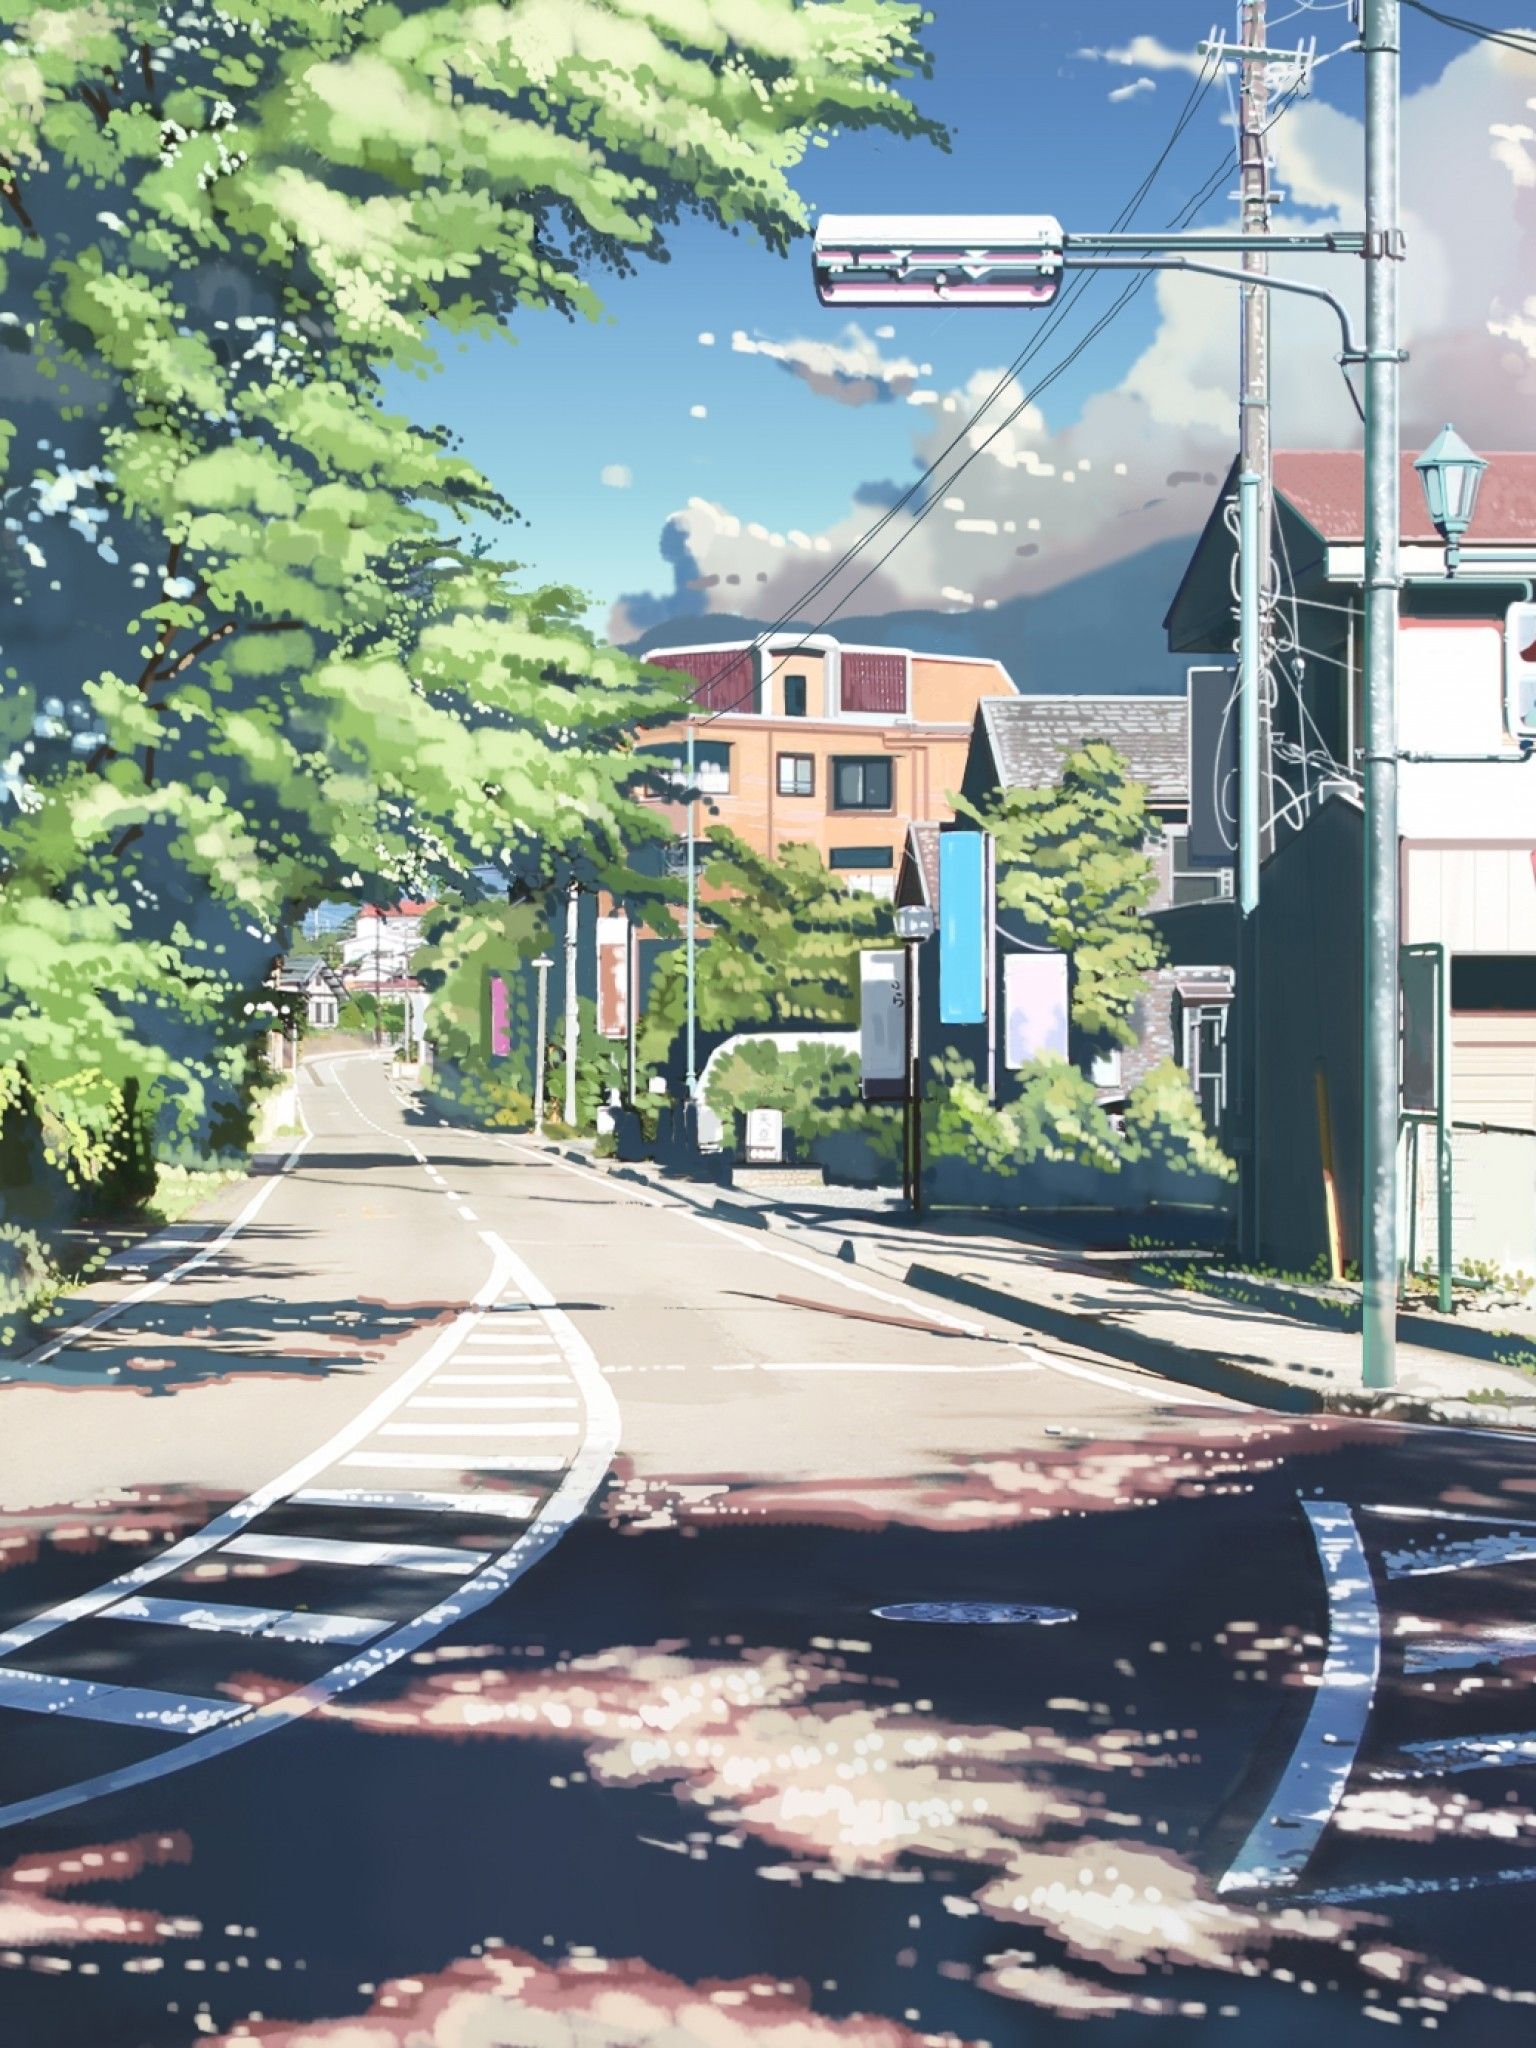 Download 1536x2048 Anime Landscape, Road, Buildings, Trees